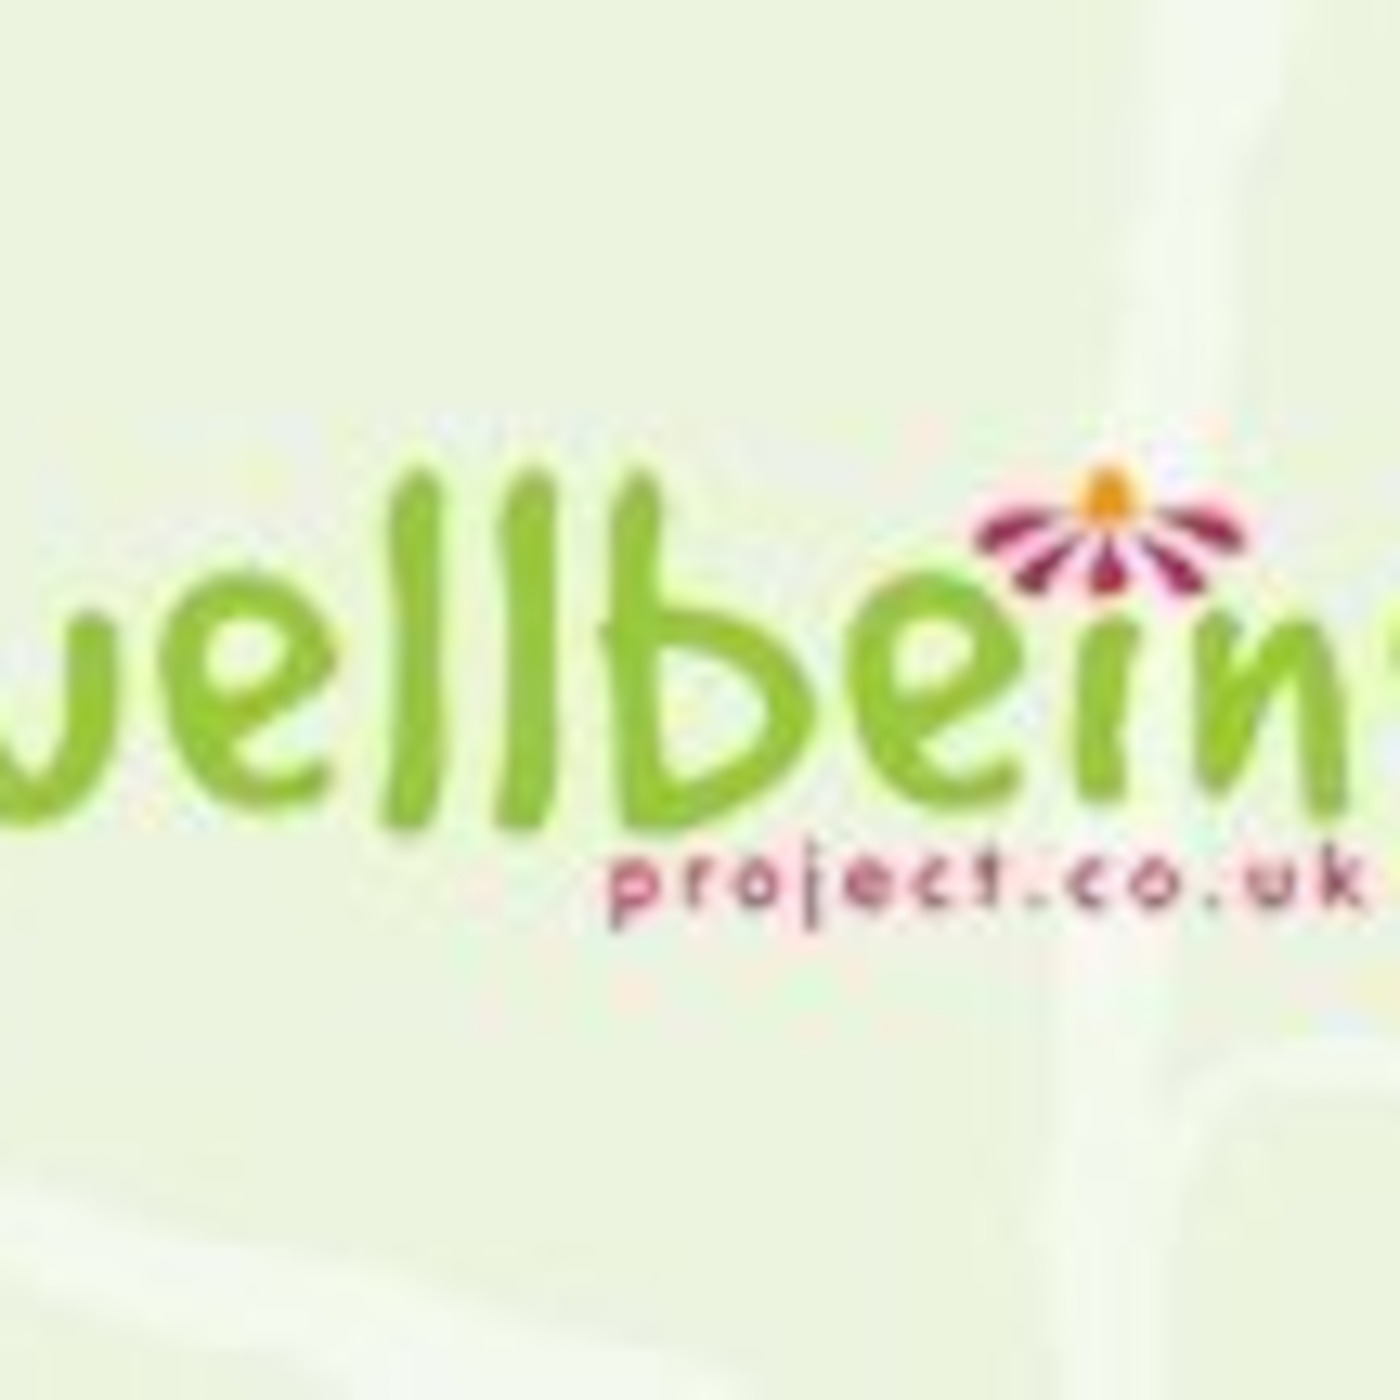 wellbeingproject's Podcast